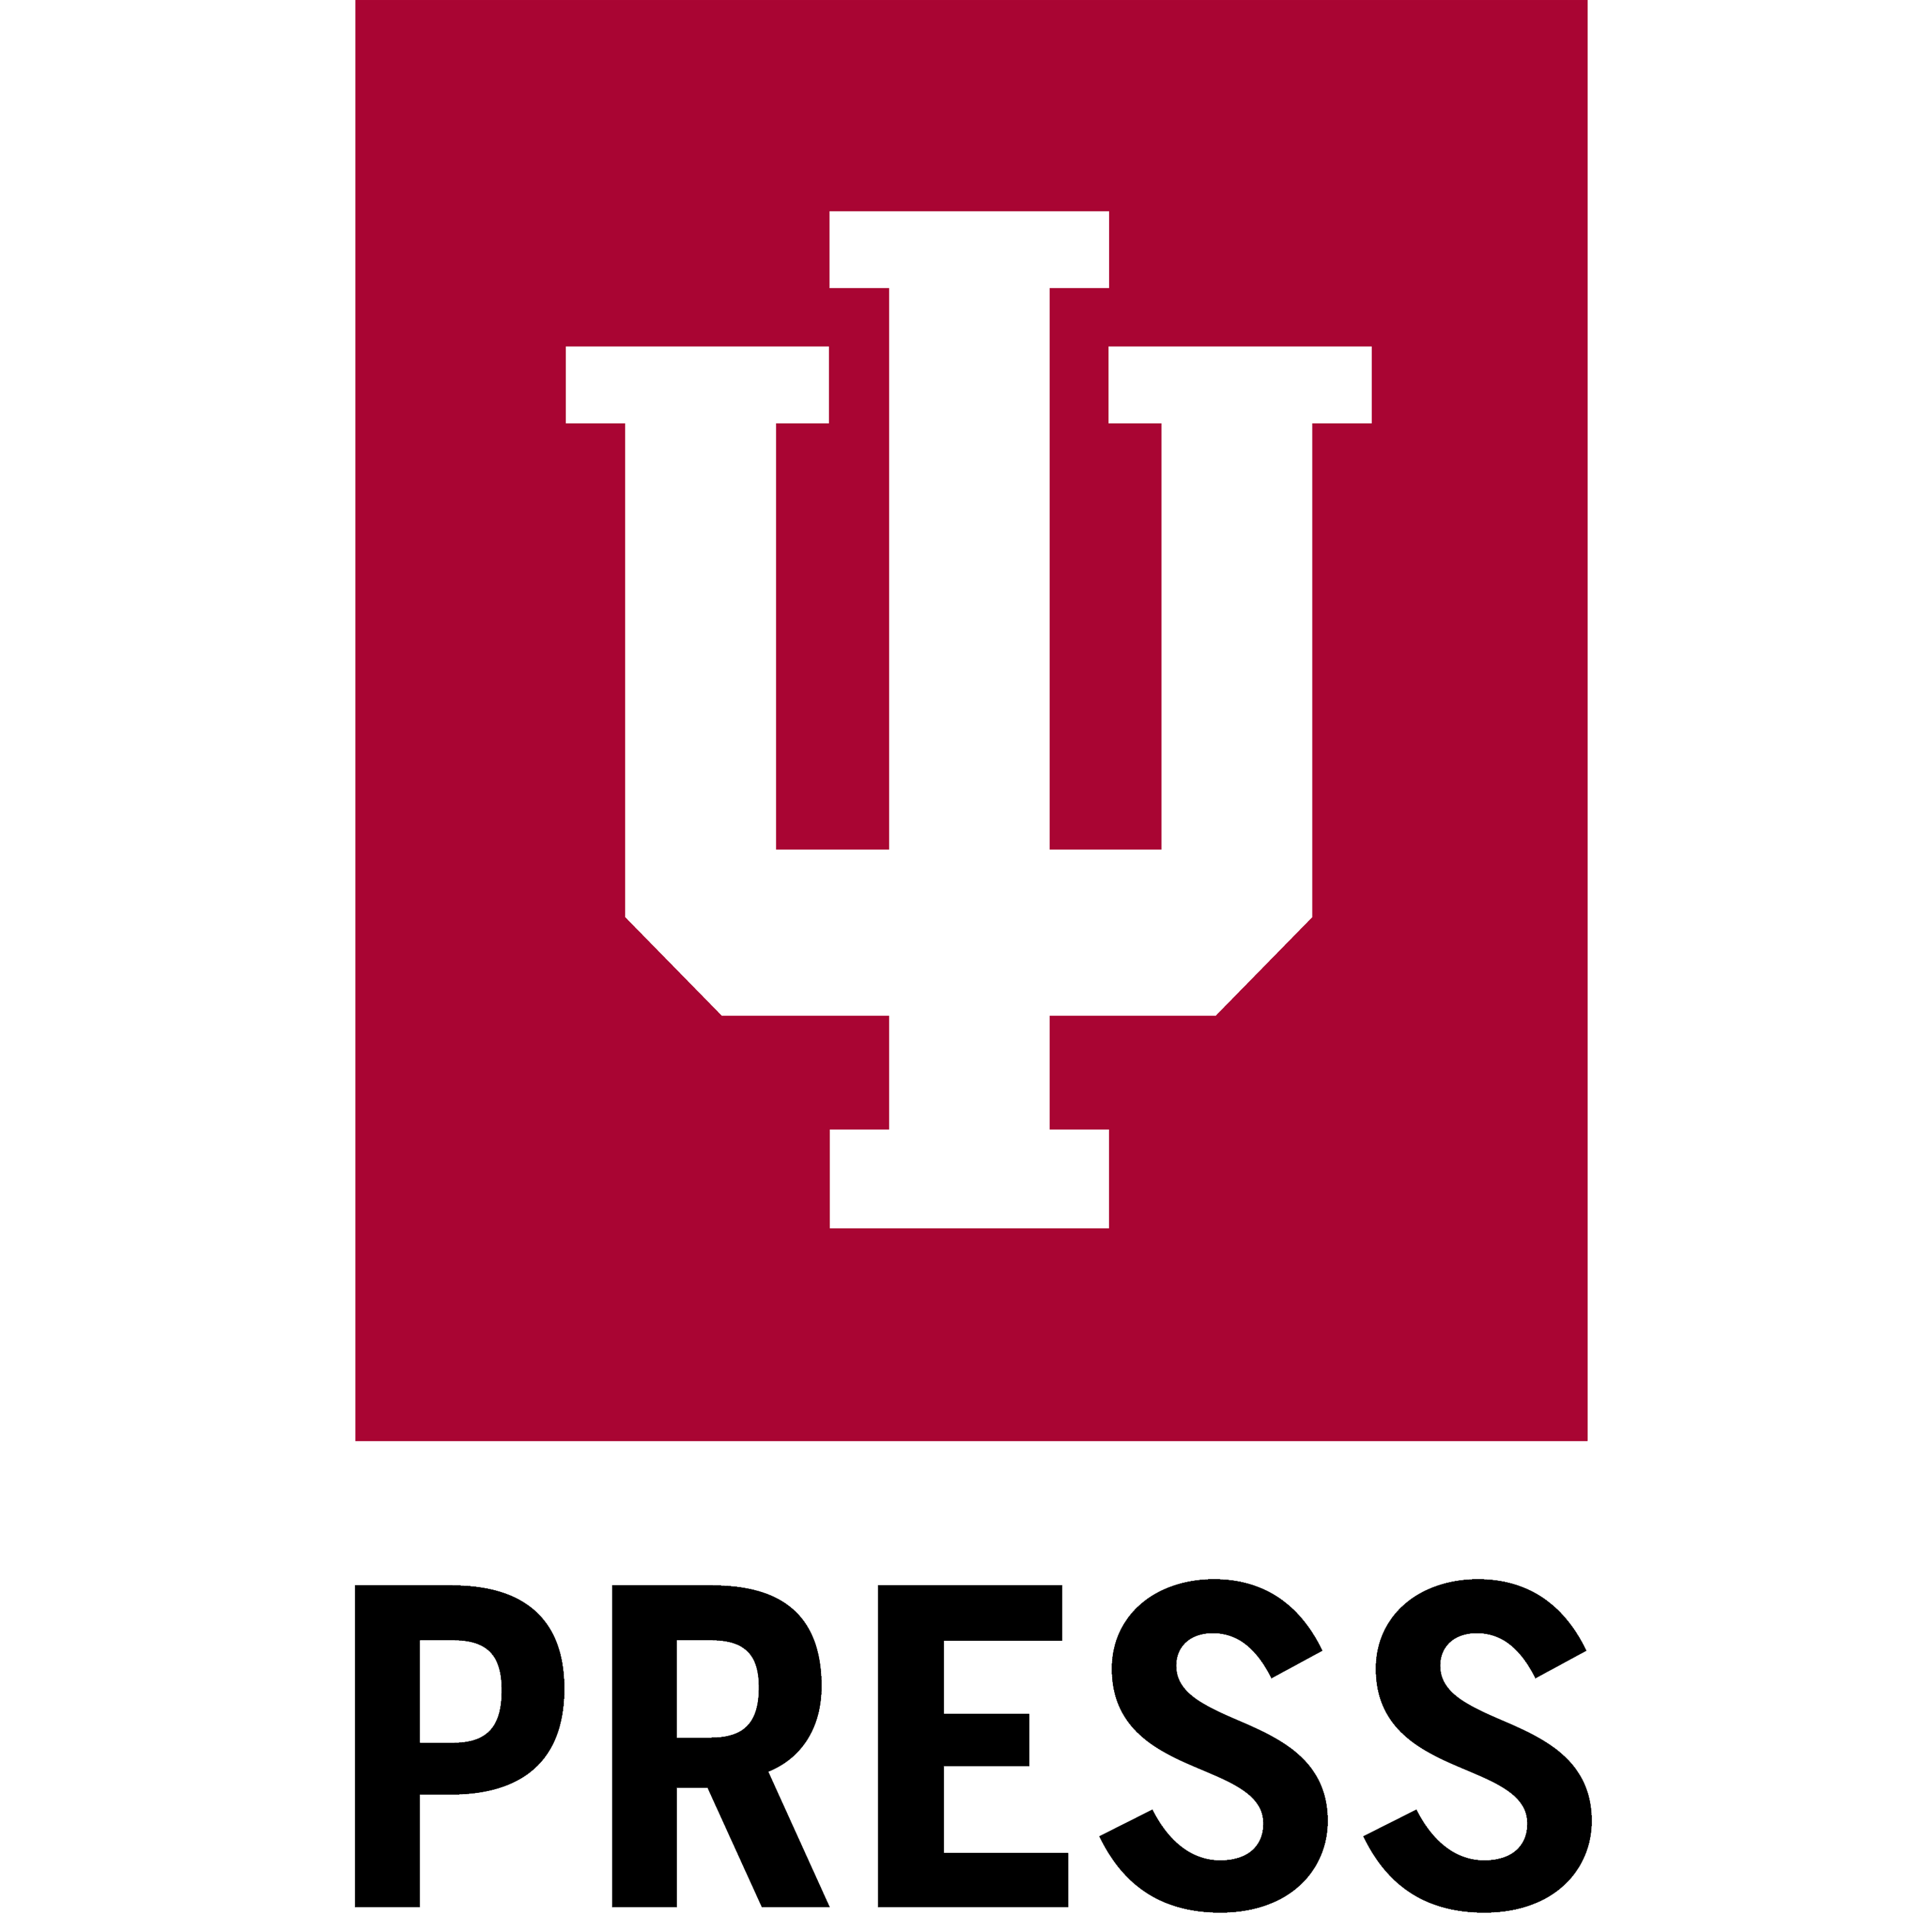 Behind the Cover with Indiana University Press